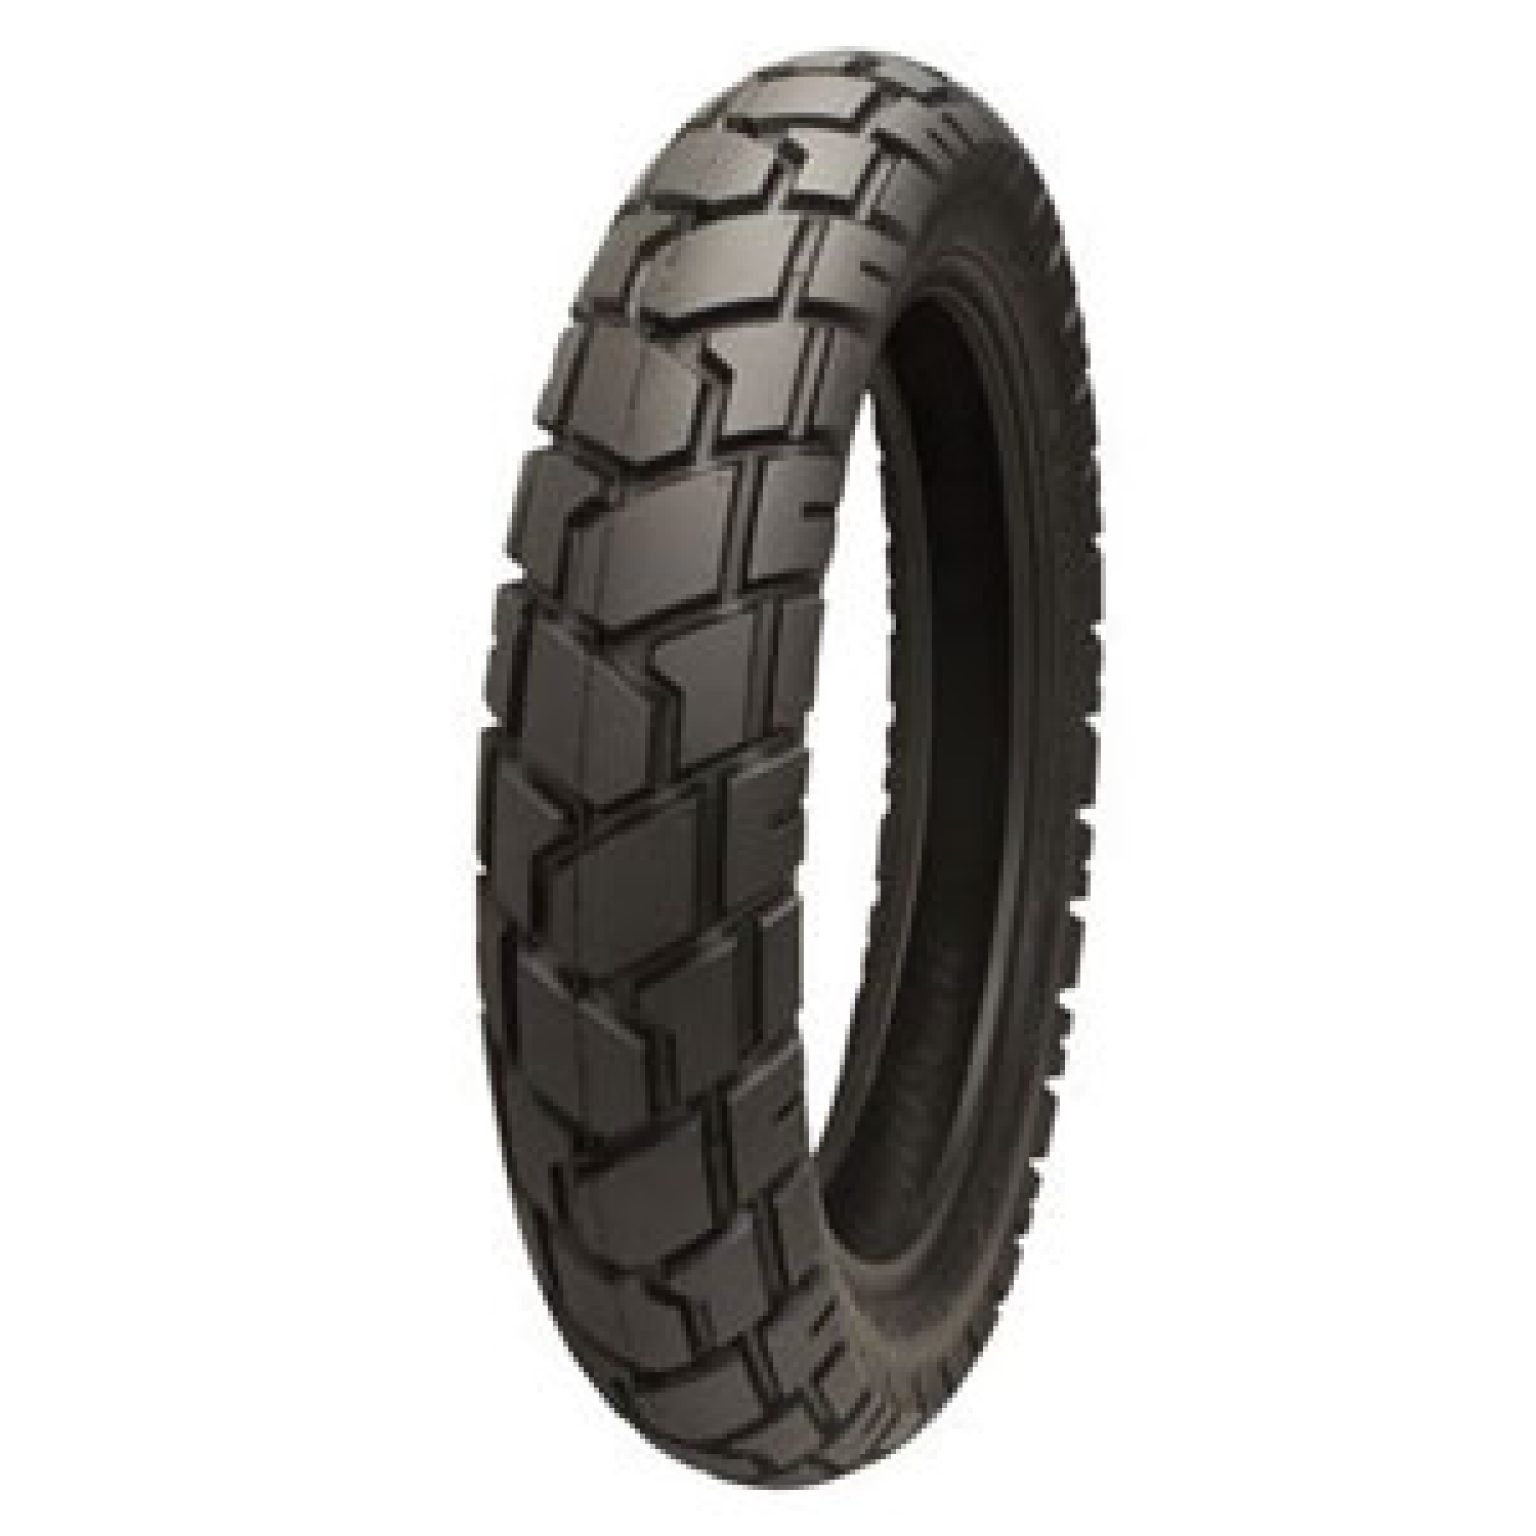 What Are Dual Sport Tires